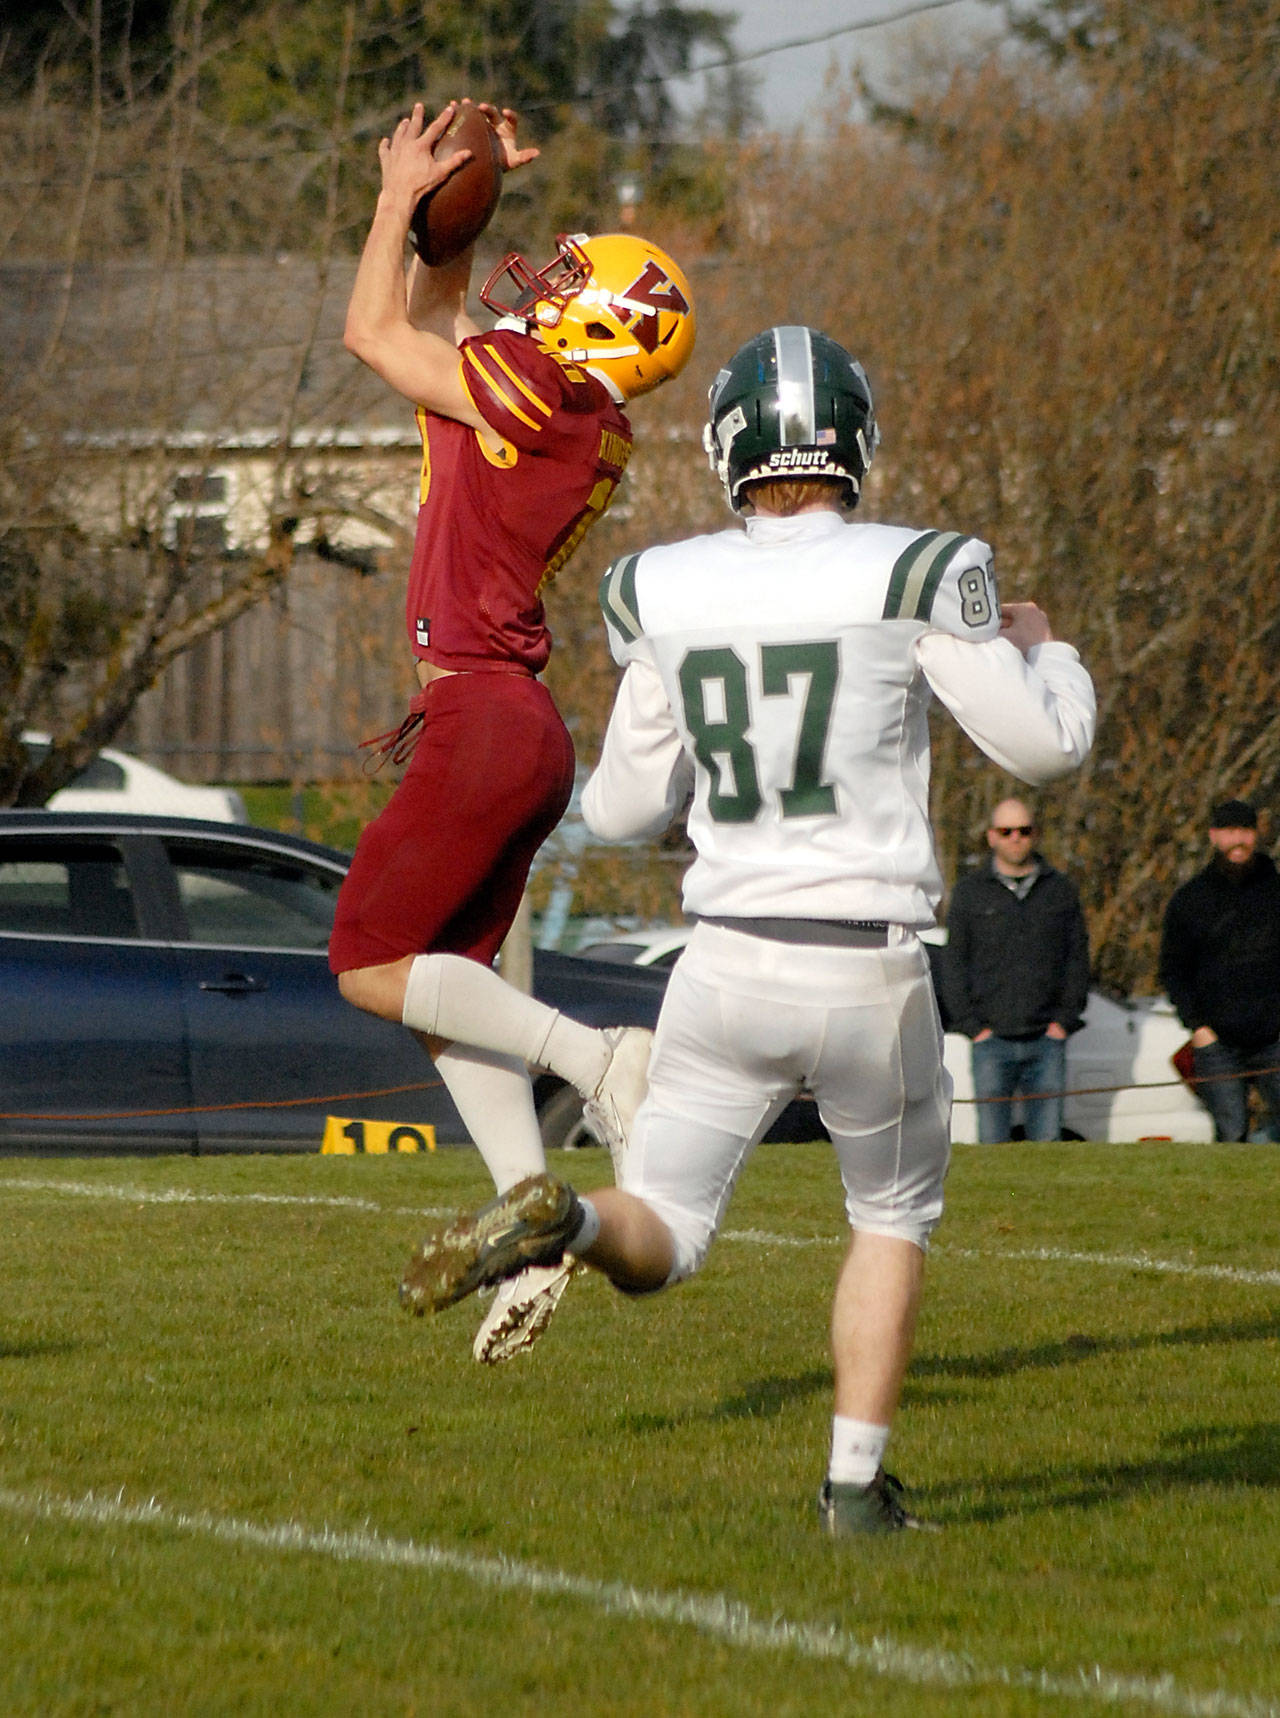 Keith Thorpe/Peninsula News Group
Kingston's Kyler Coe-yarr pulls down an interception from a pass intended for Port Angeles' Cyras Mills in the closing moments of the first half on Saturday in Port Angeles.